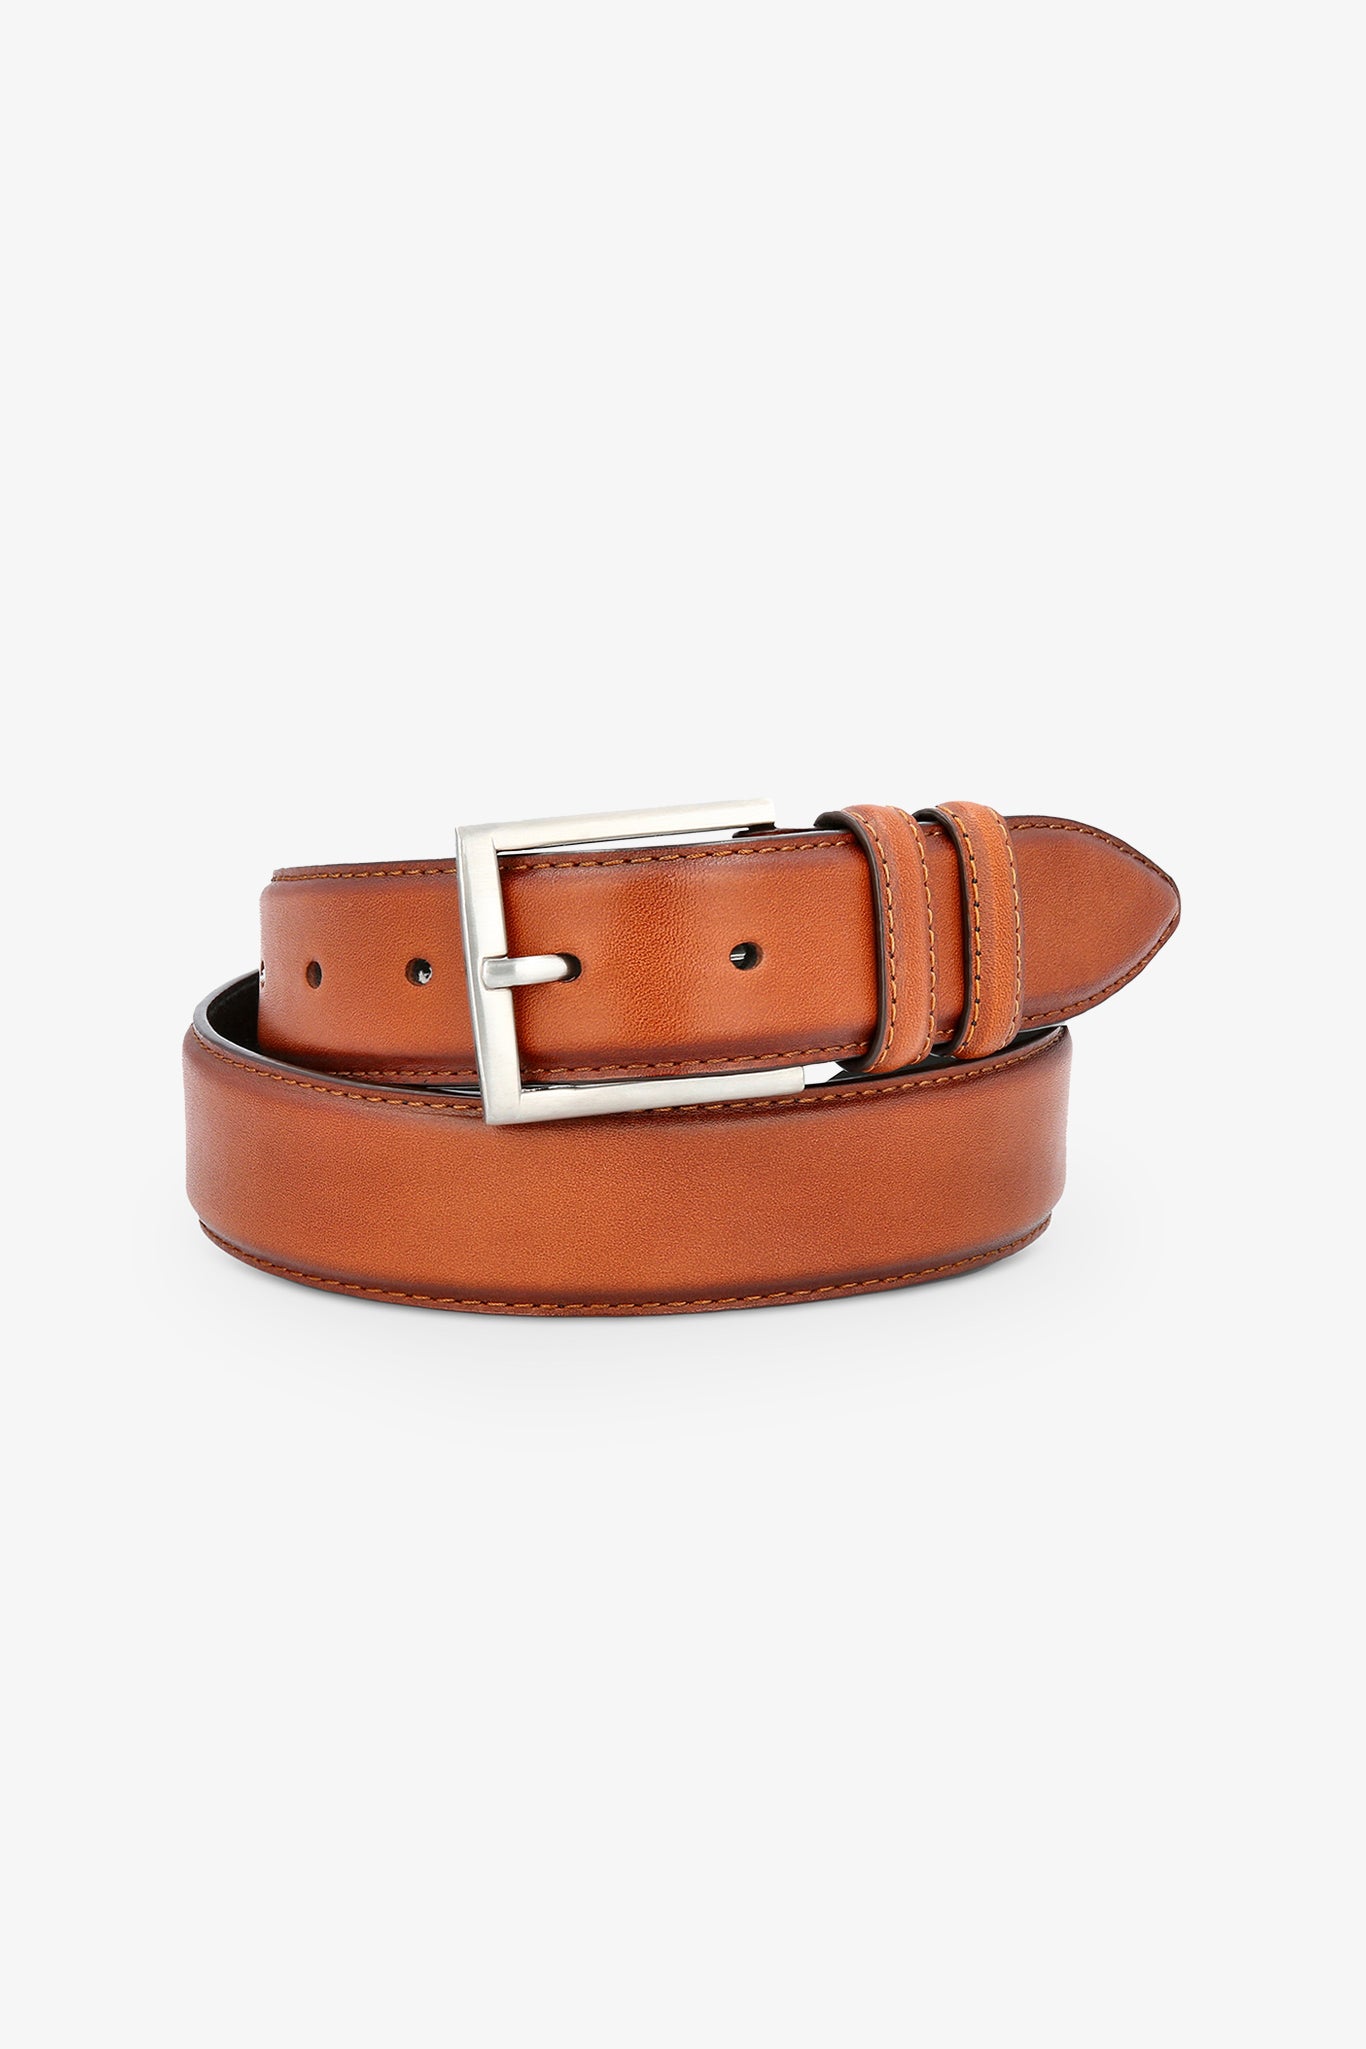 Leather Belt in Tan by SuitShop, front view